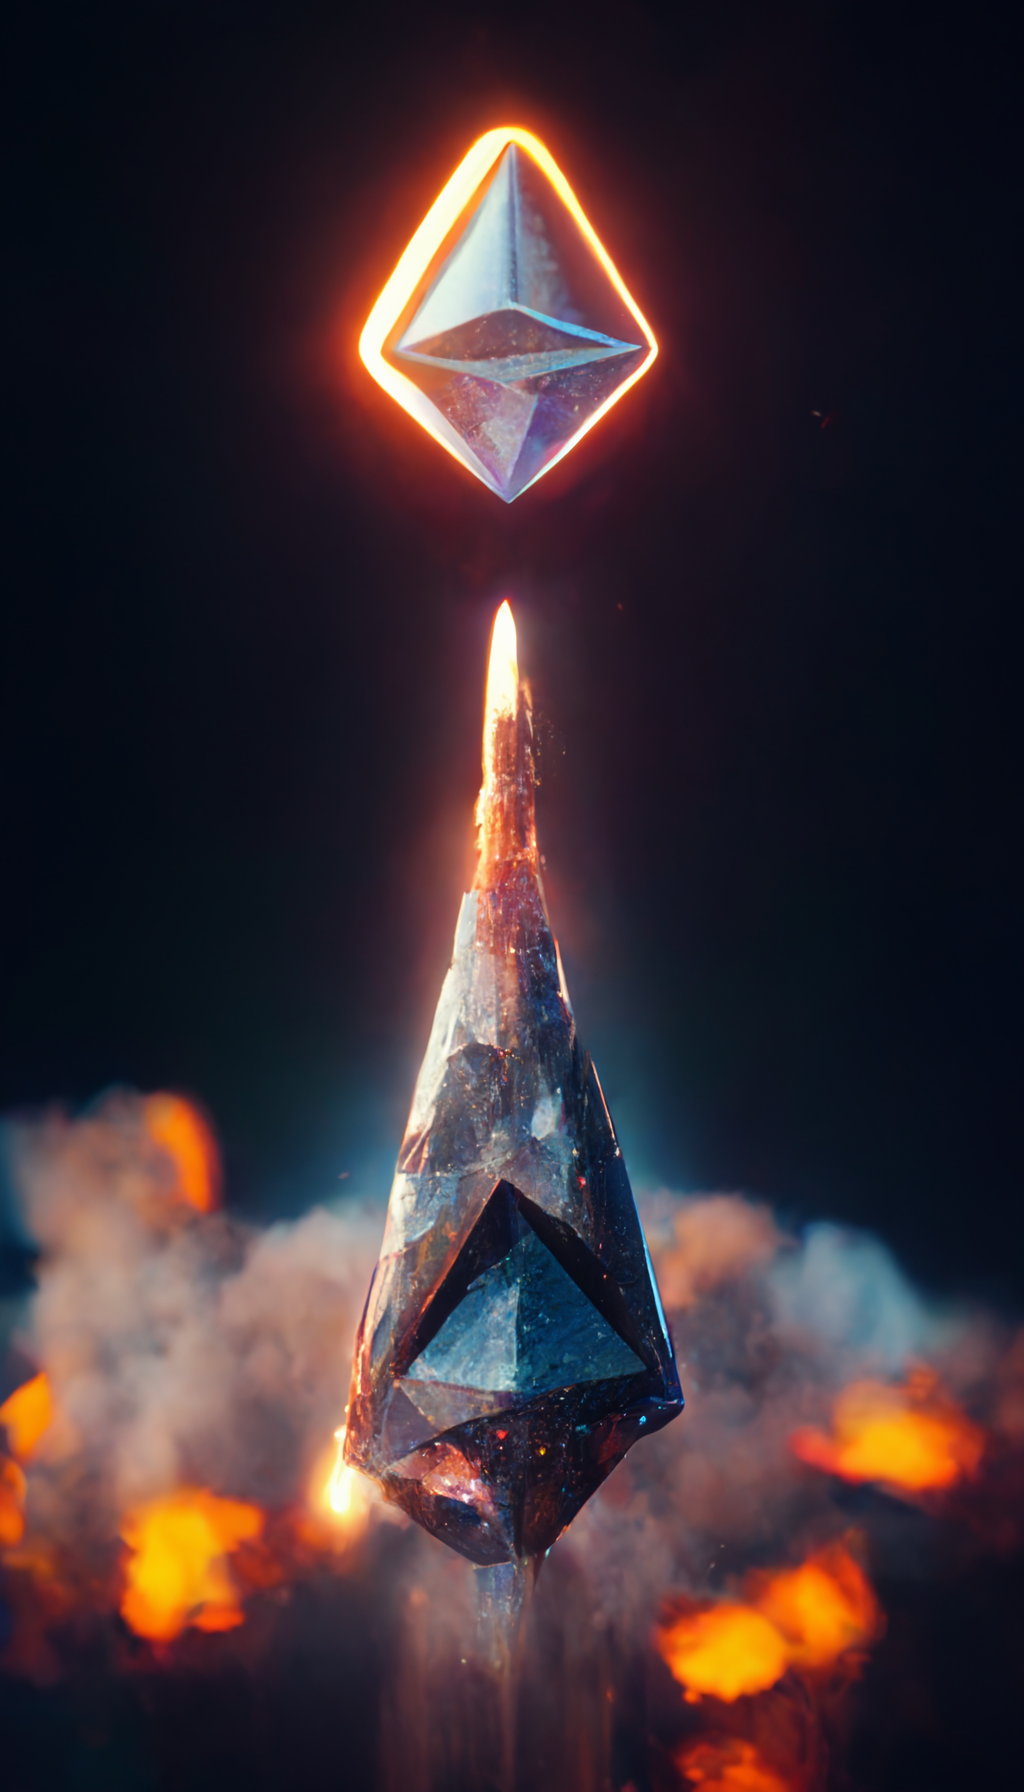 Displaying a file named Grunderwear_cinematic_shot_the_diamond_shaped_Ethereum_logo_att_43bad1c9-e943-4588-8bde-5f381cb450be.png